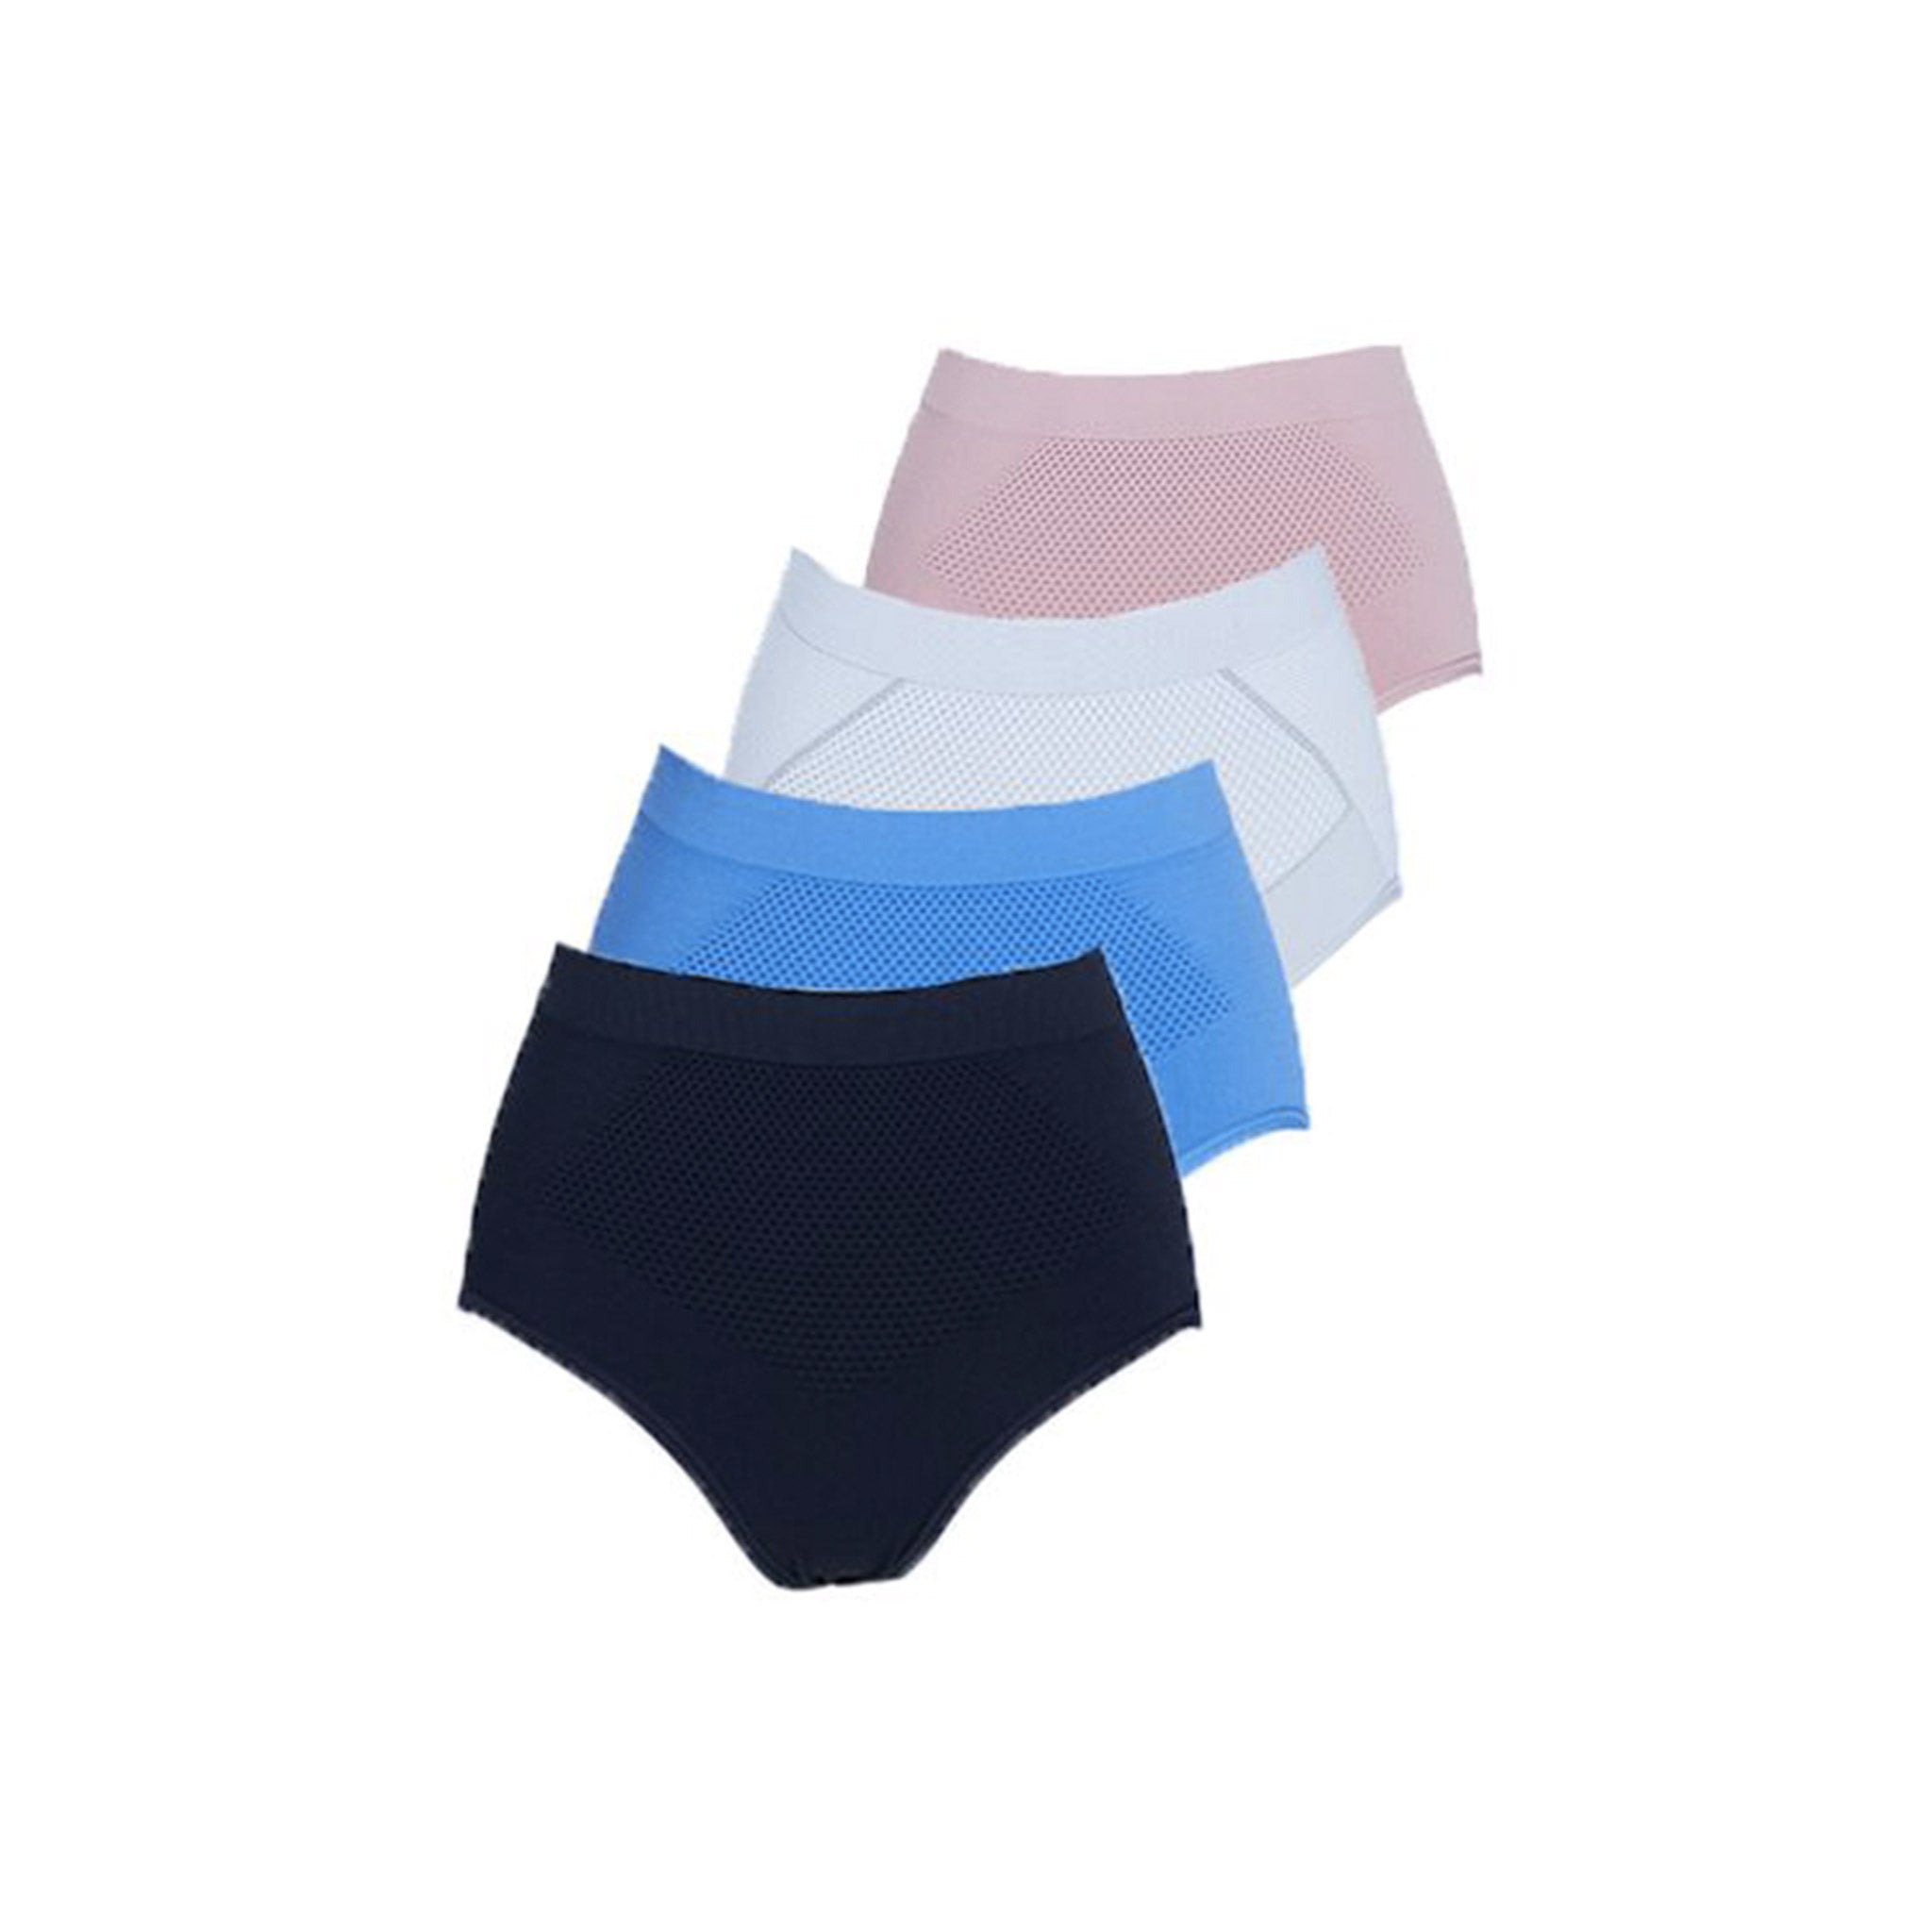 PP Graphene Women's Mitochondrion Panties (4pc Set Mix Colour) – Beauty In  You Singapore